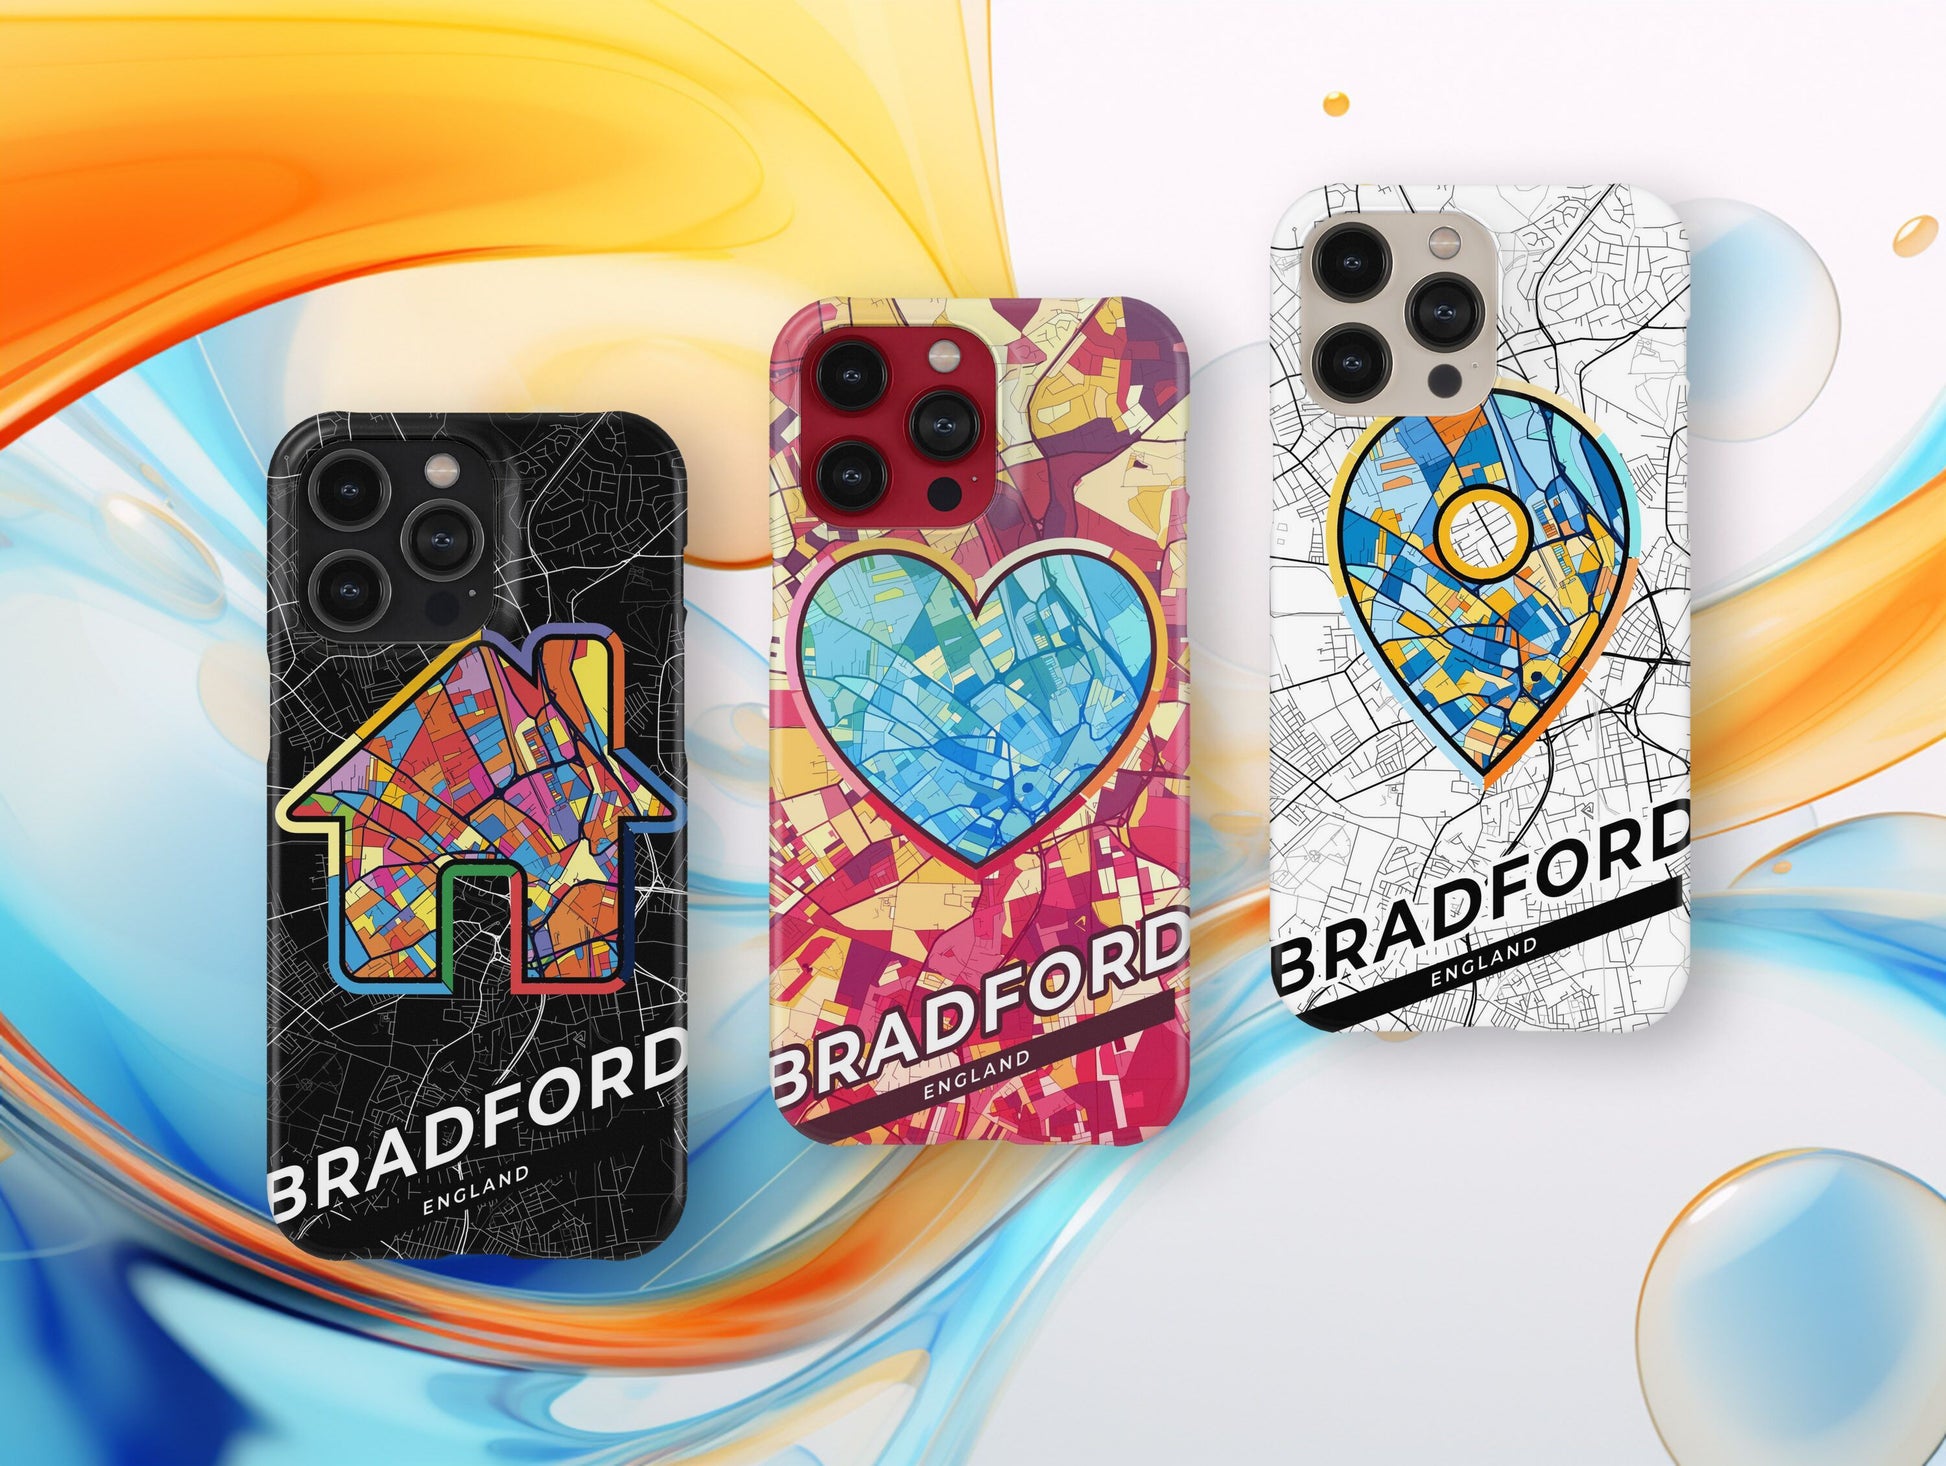 Bradford England slim phone case with colorful icon. Birthday, wedding or housewarming gift. Couple match cases.